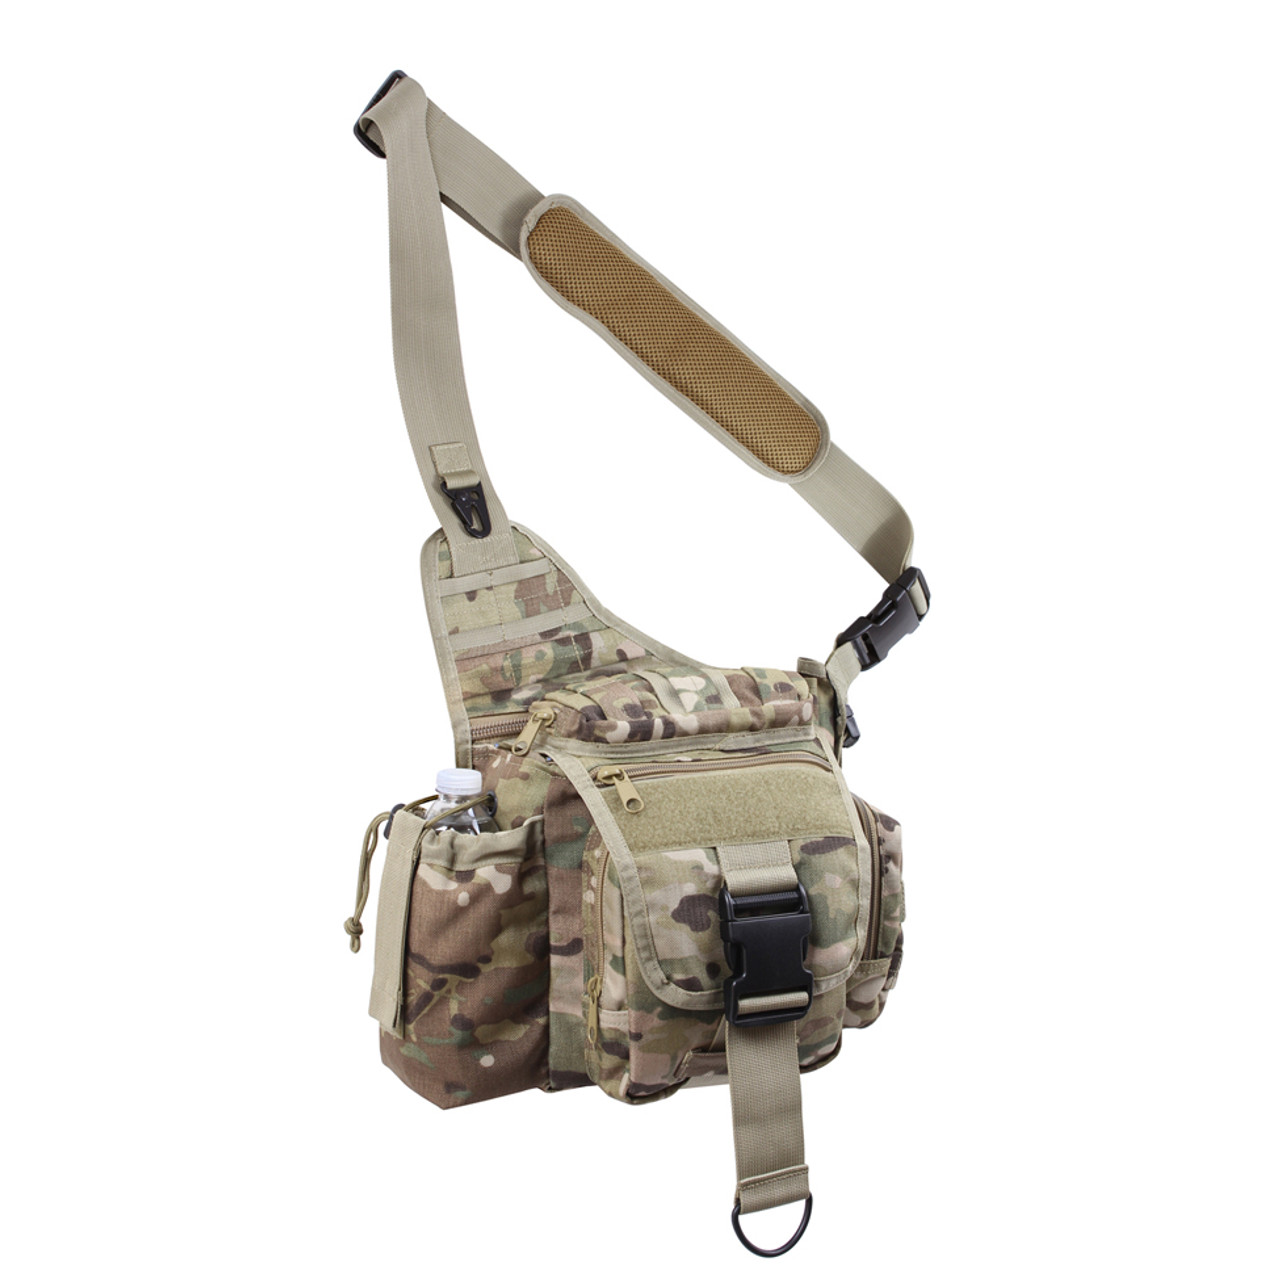 Shop Tactical Concealed Carry Fanny Pack - Fatigues Army Navy